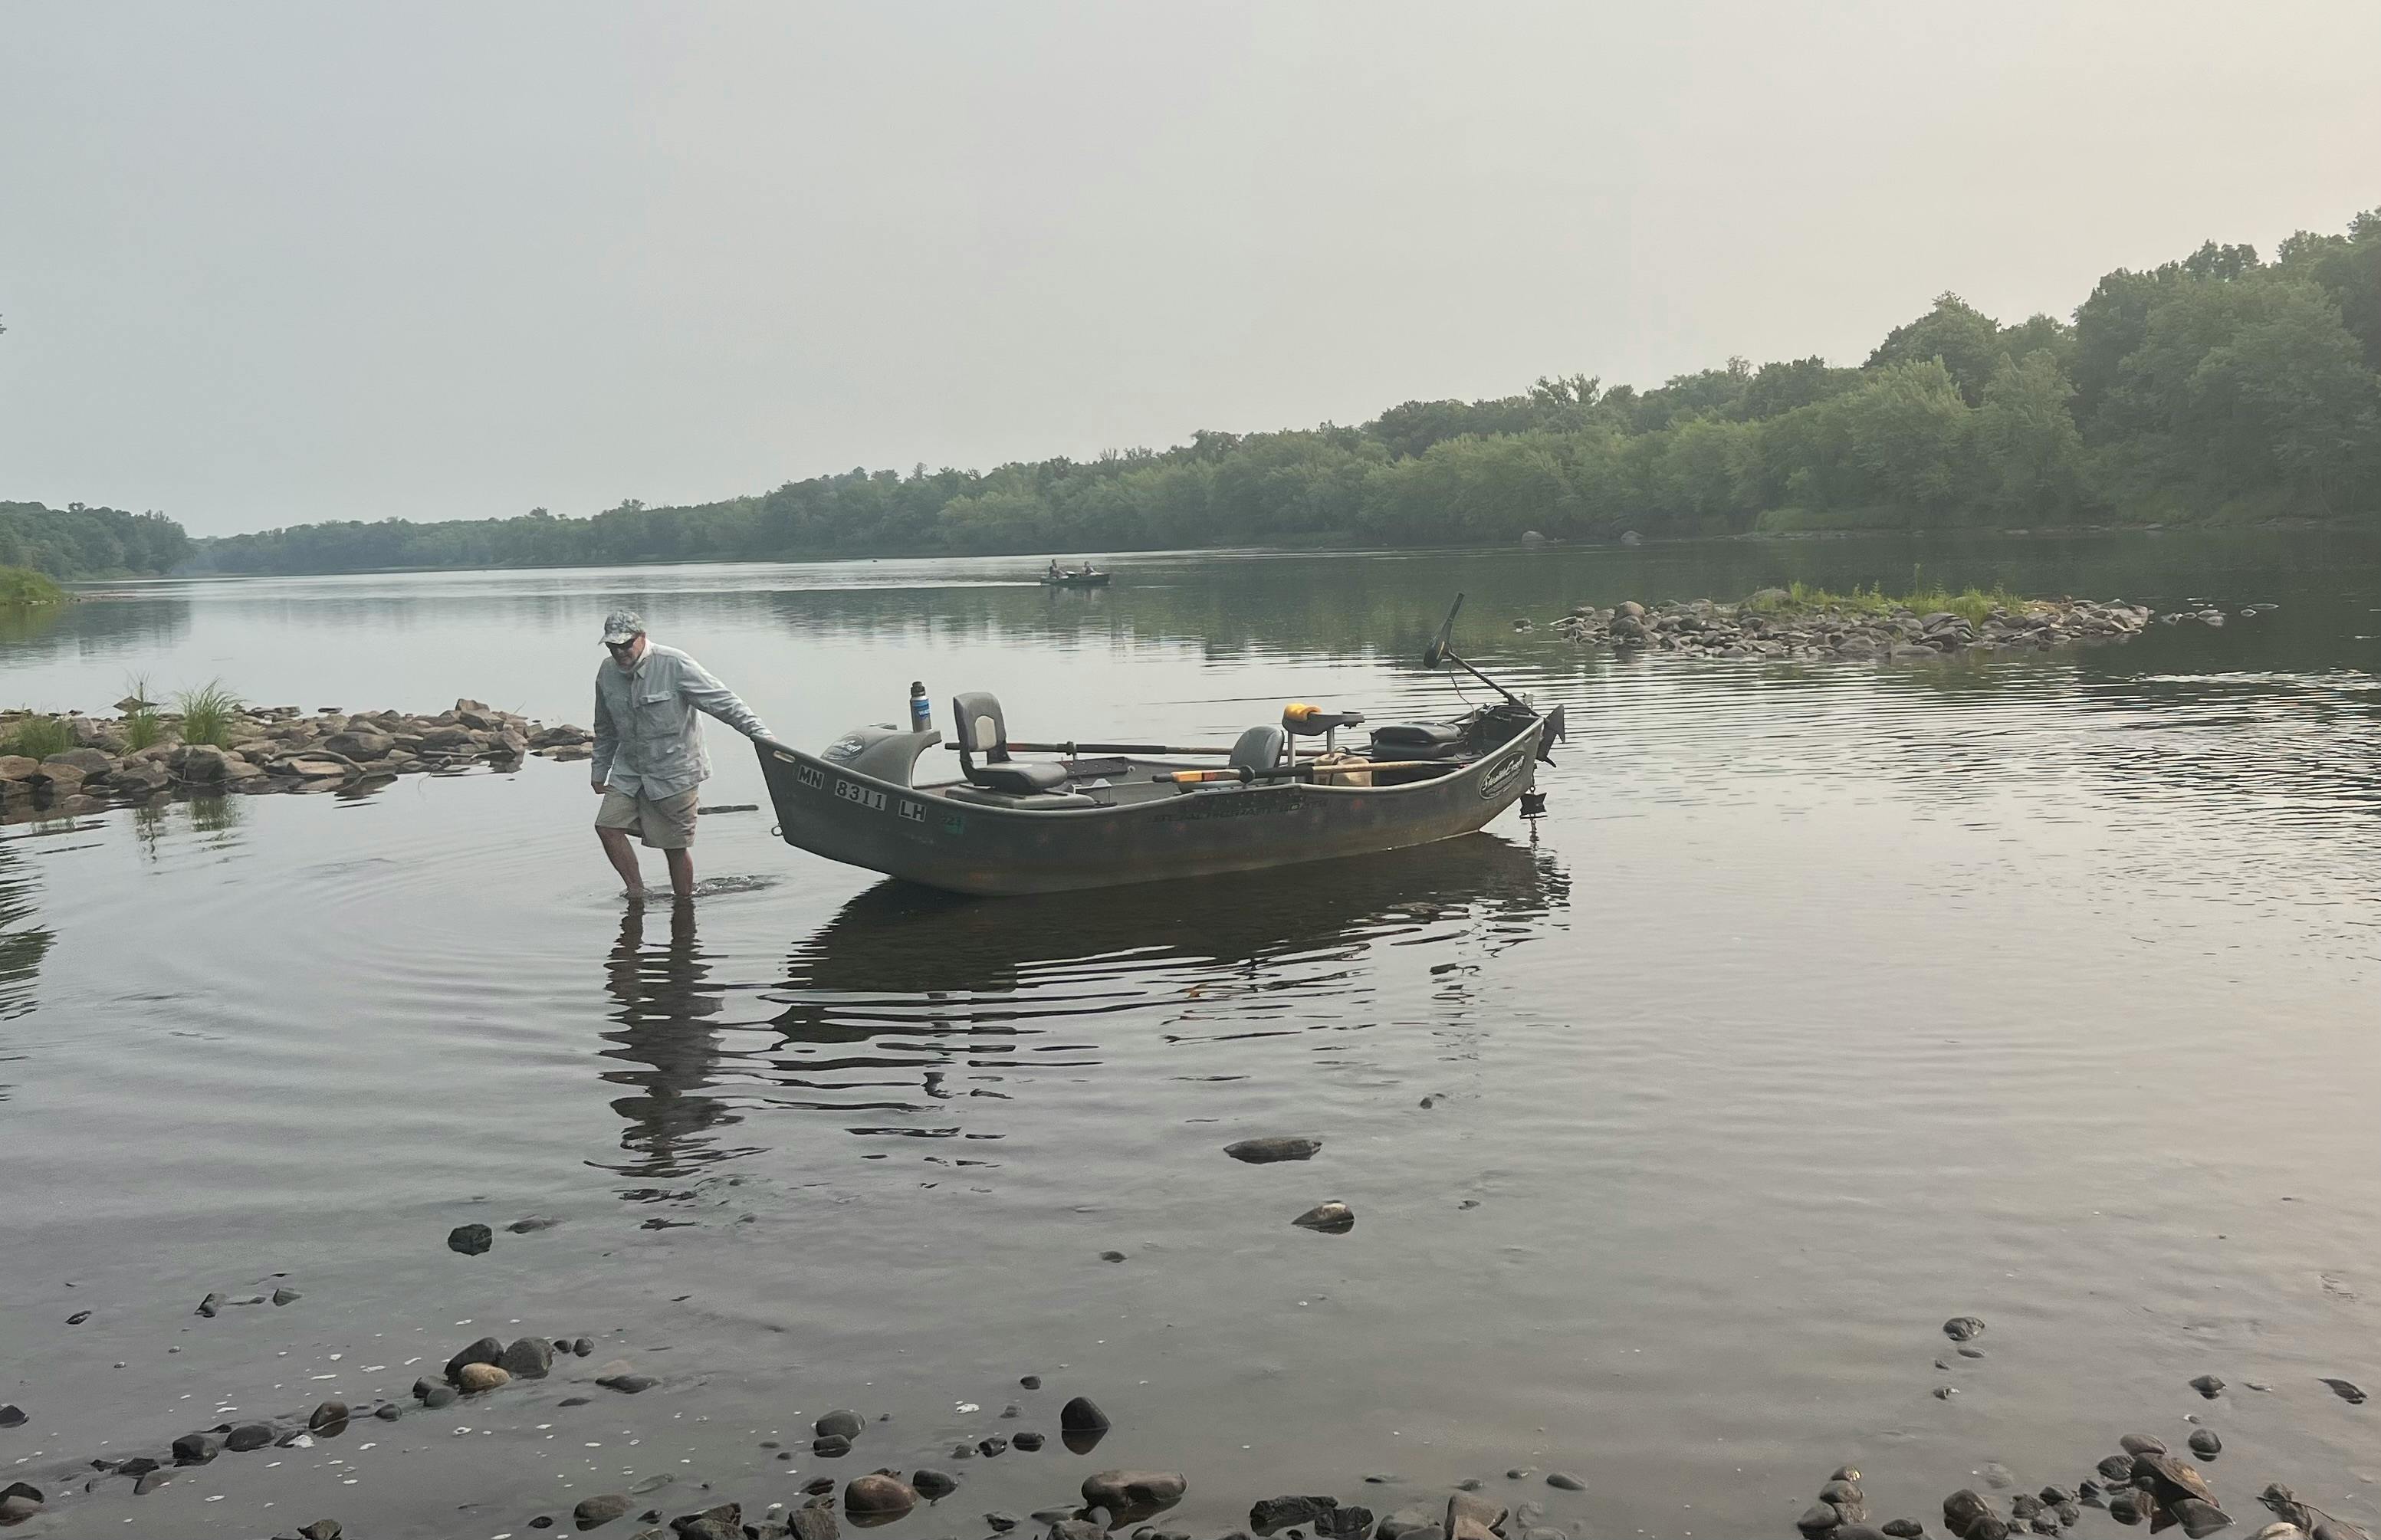 This stretch of St. Croix River is a wonder: Wild, scenic and kind of fishy